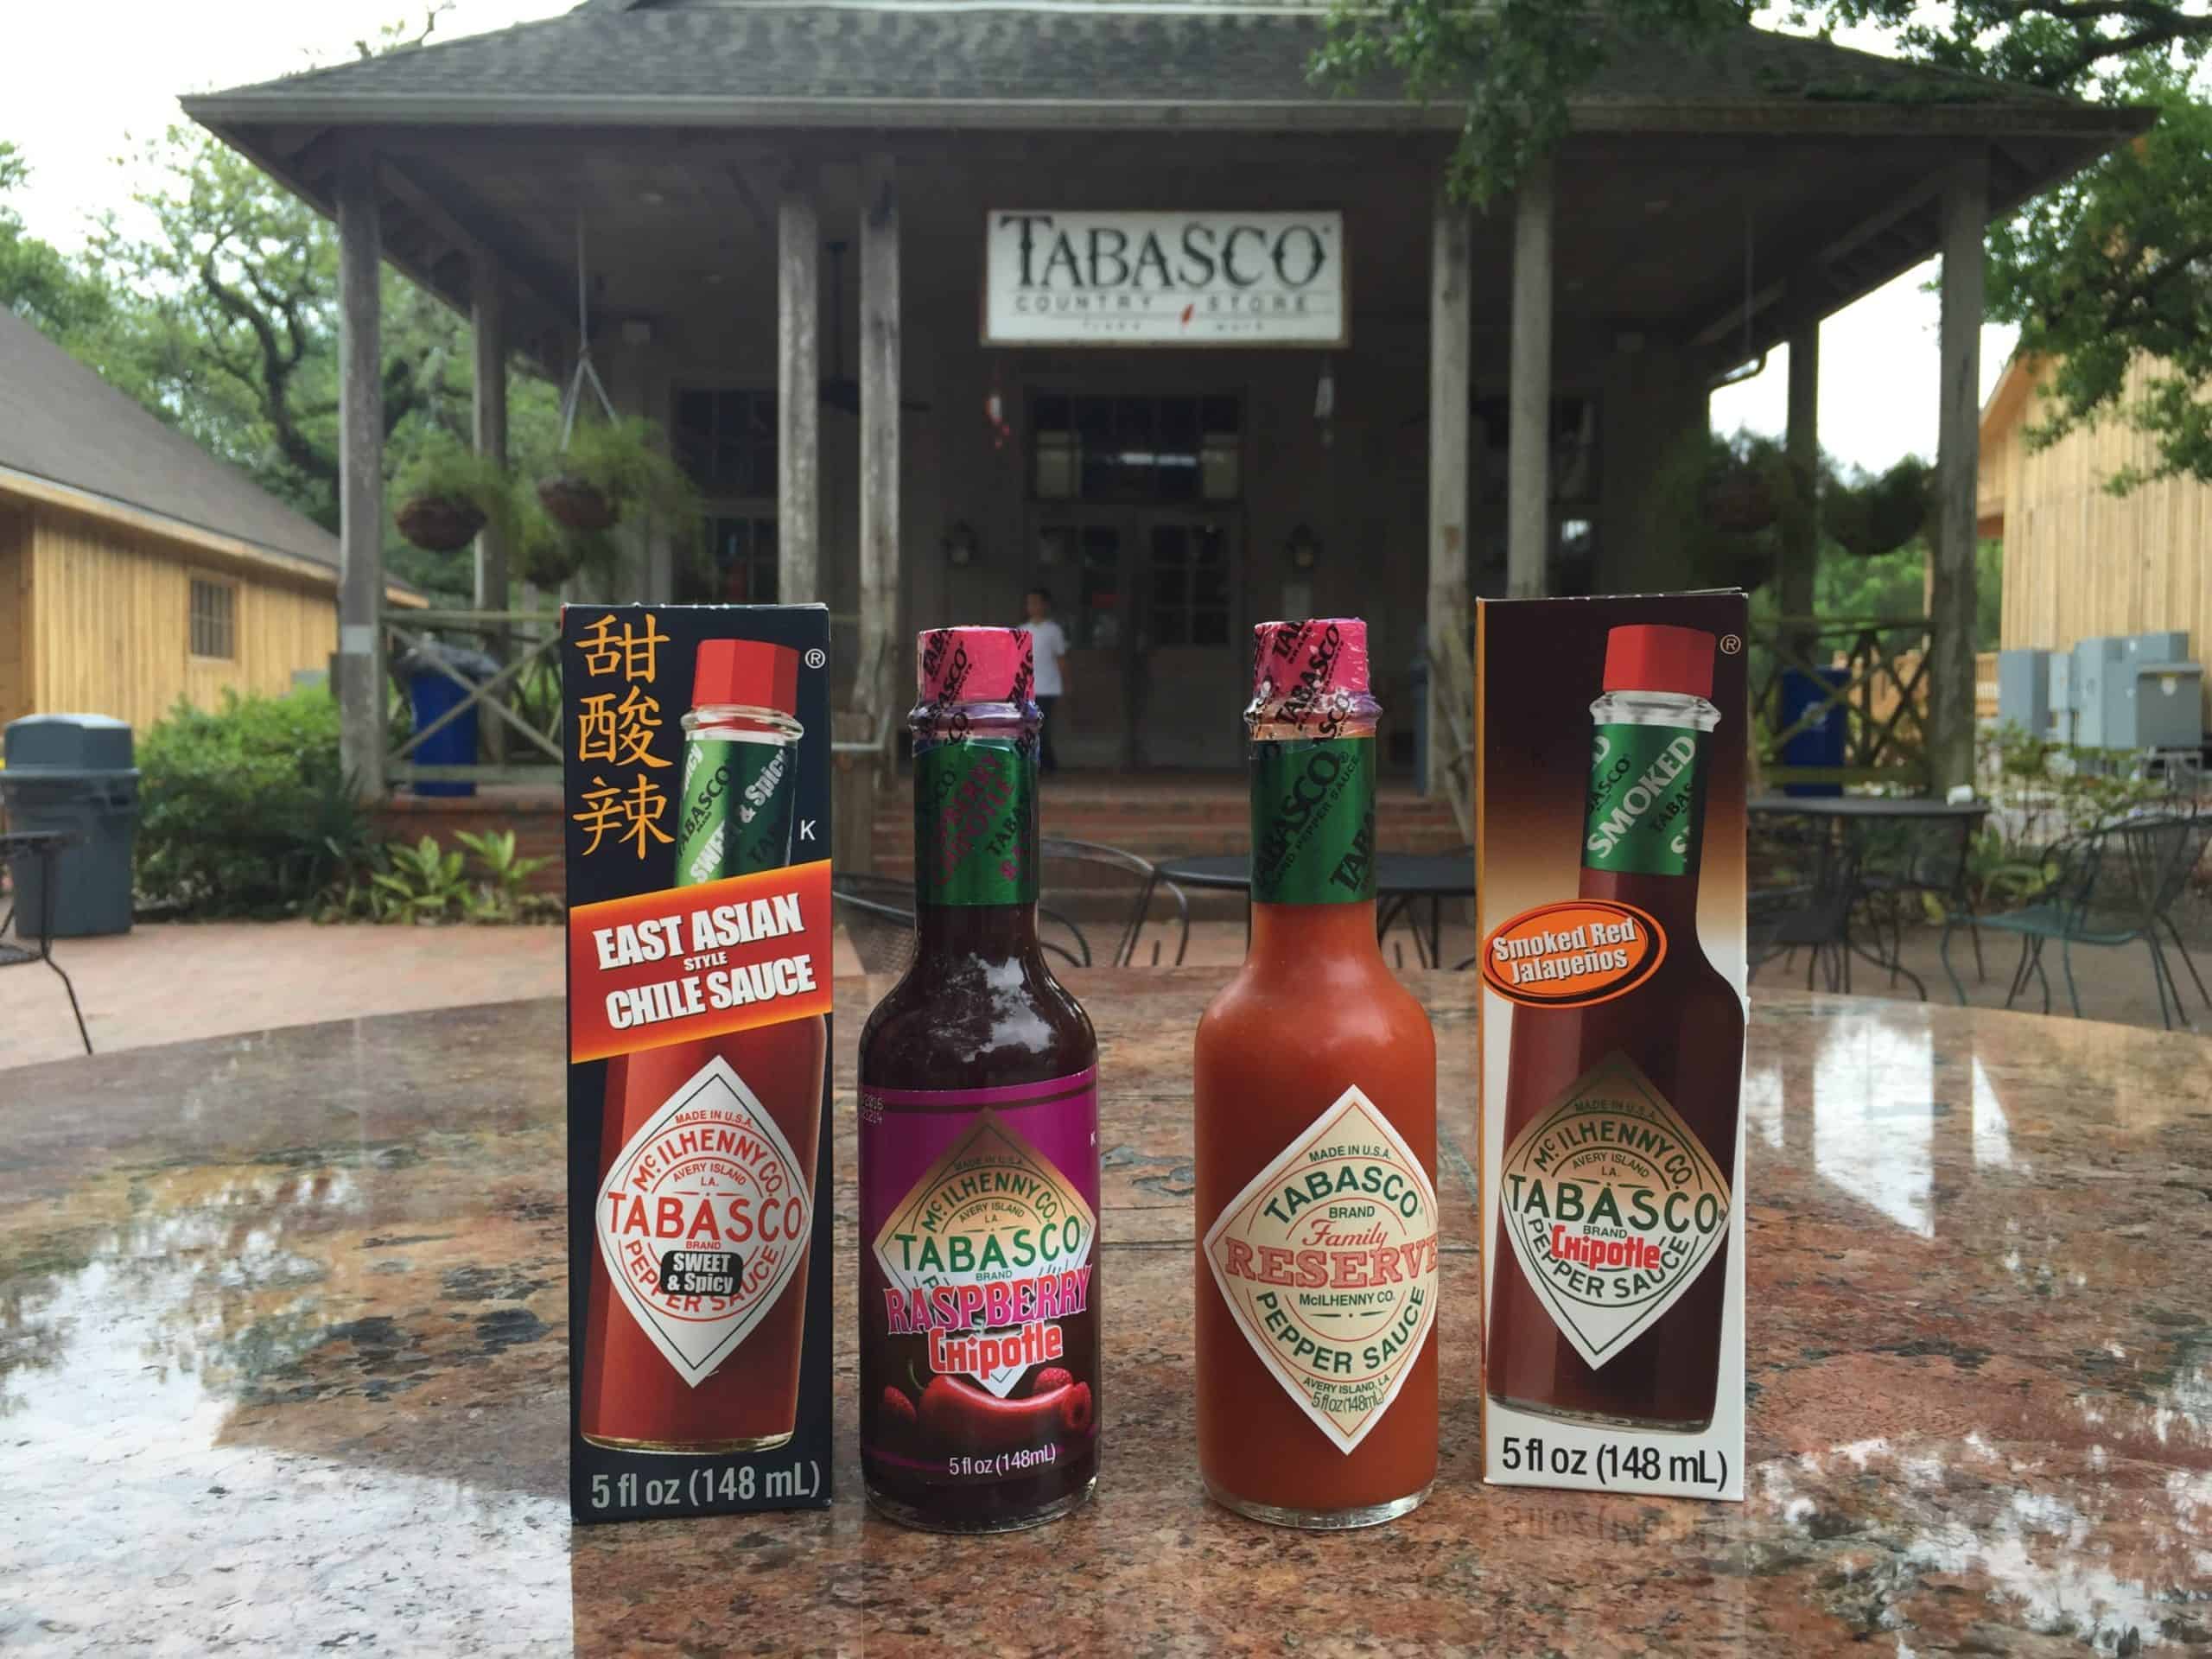 Best things to do in Lafayette Louisiana Toby Dore My Tabasco purchases